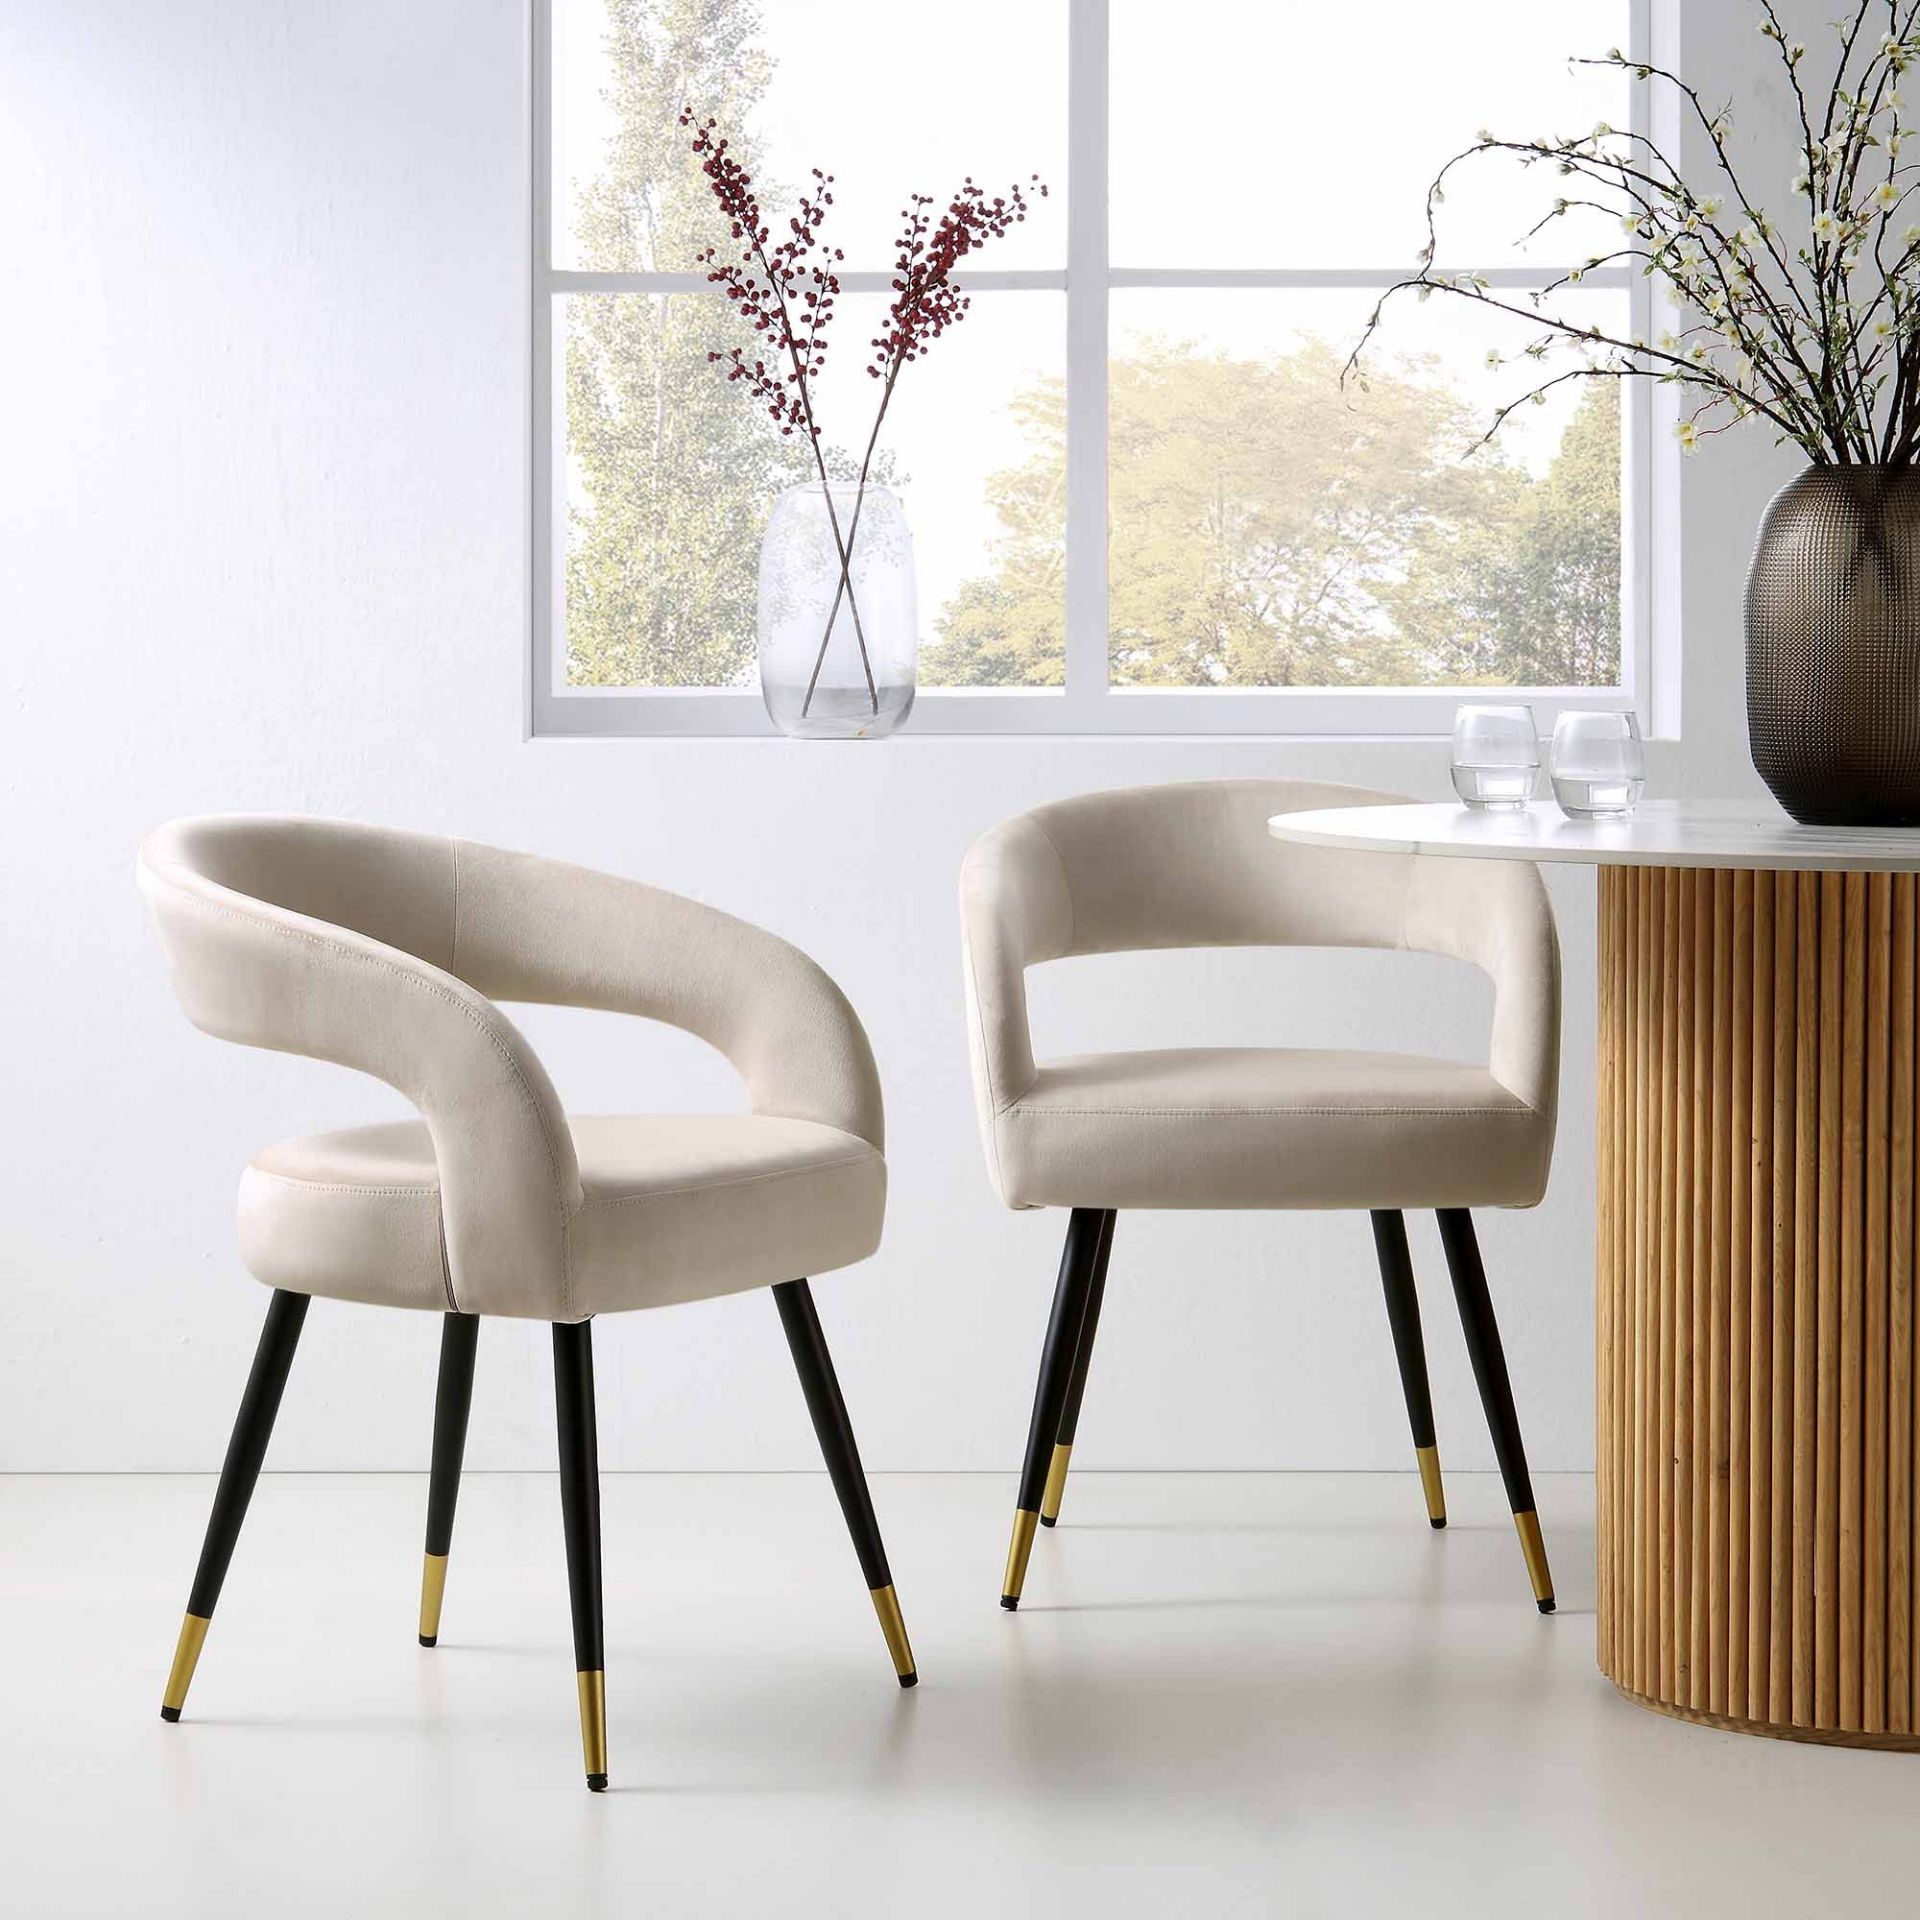 Laurel Wave Champagne Velvet Set of 2 Dining Chairs. - R14BW. RRP £259.99. The curved cut out - Image 3 of 4